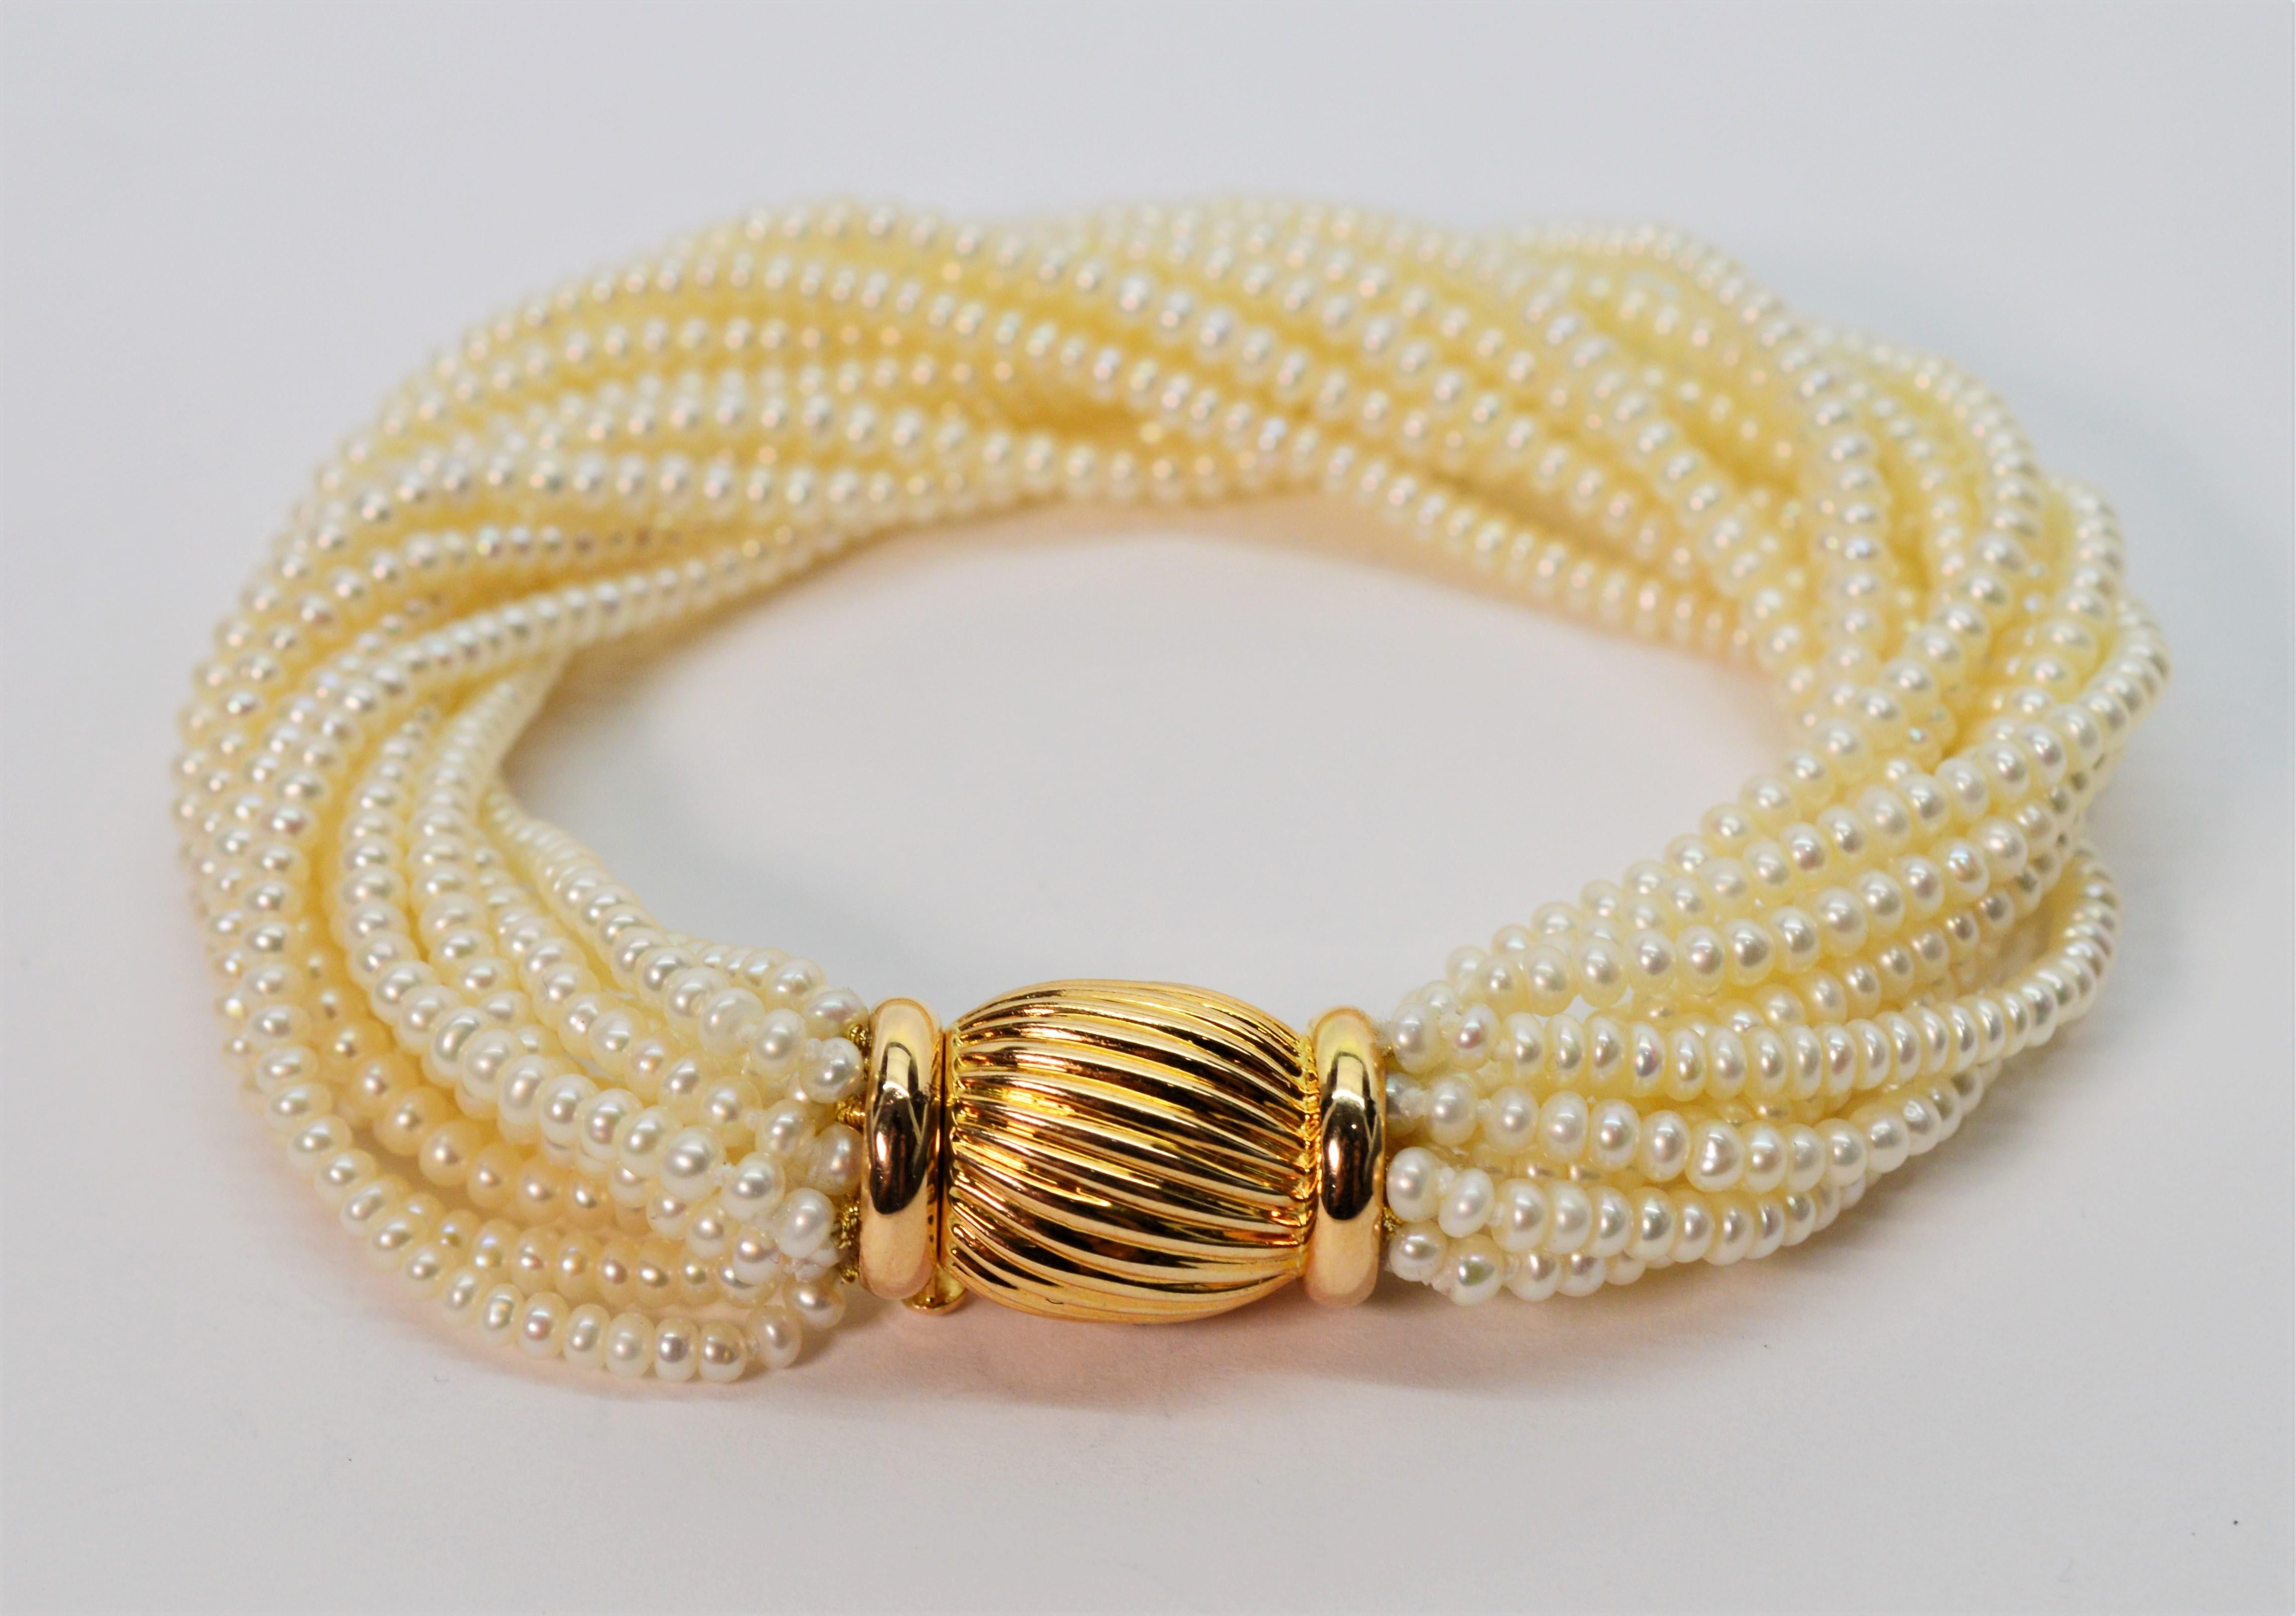 Multi Strand Pearl Wrap Bracelet with Decorative Yellow Gold Bow Tie Clasp In New Condition For Sale In Mount Kisco, NY